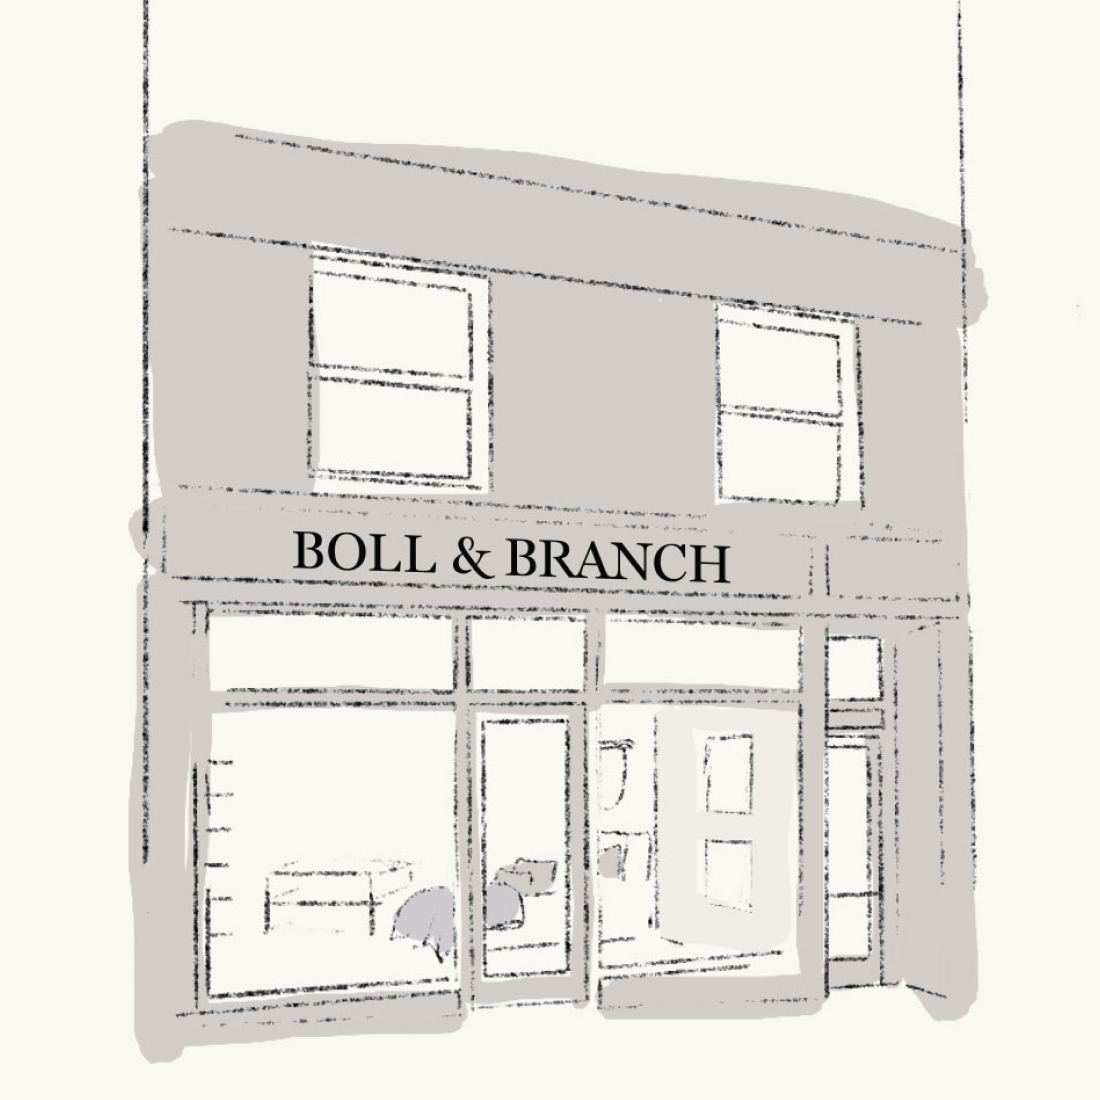 Boll & Branch - Get cozy with an escape to the Boll 